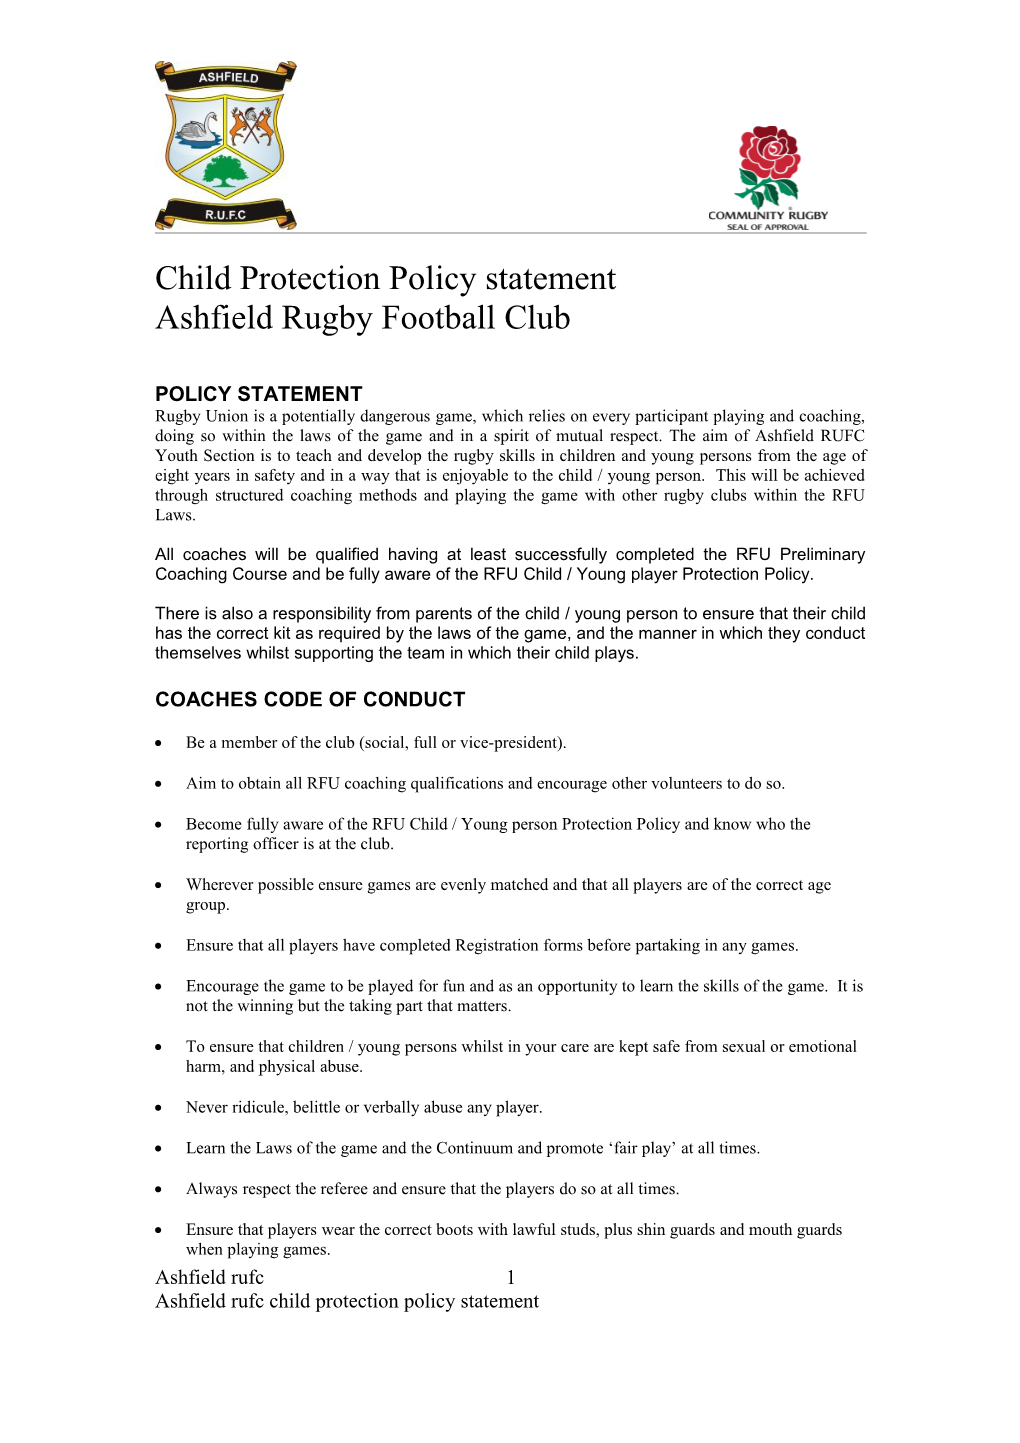 Child Protection Policy Statement s1